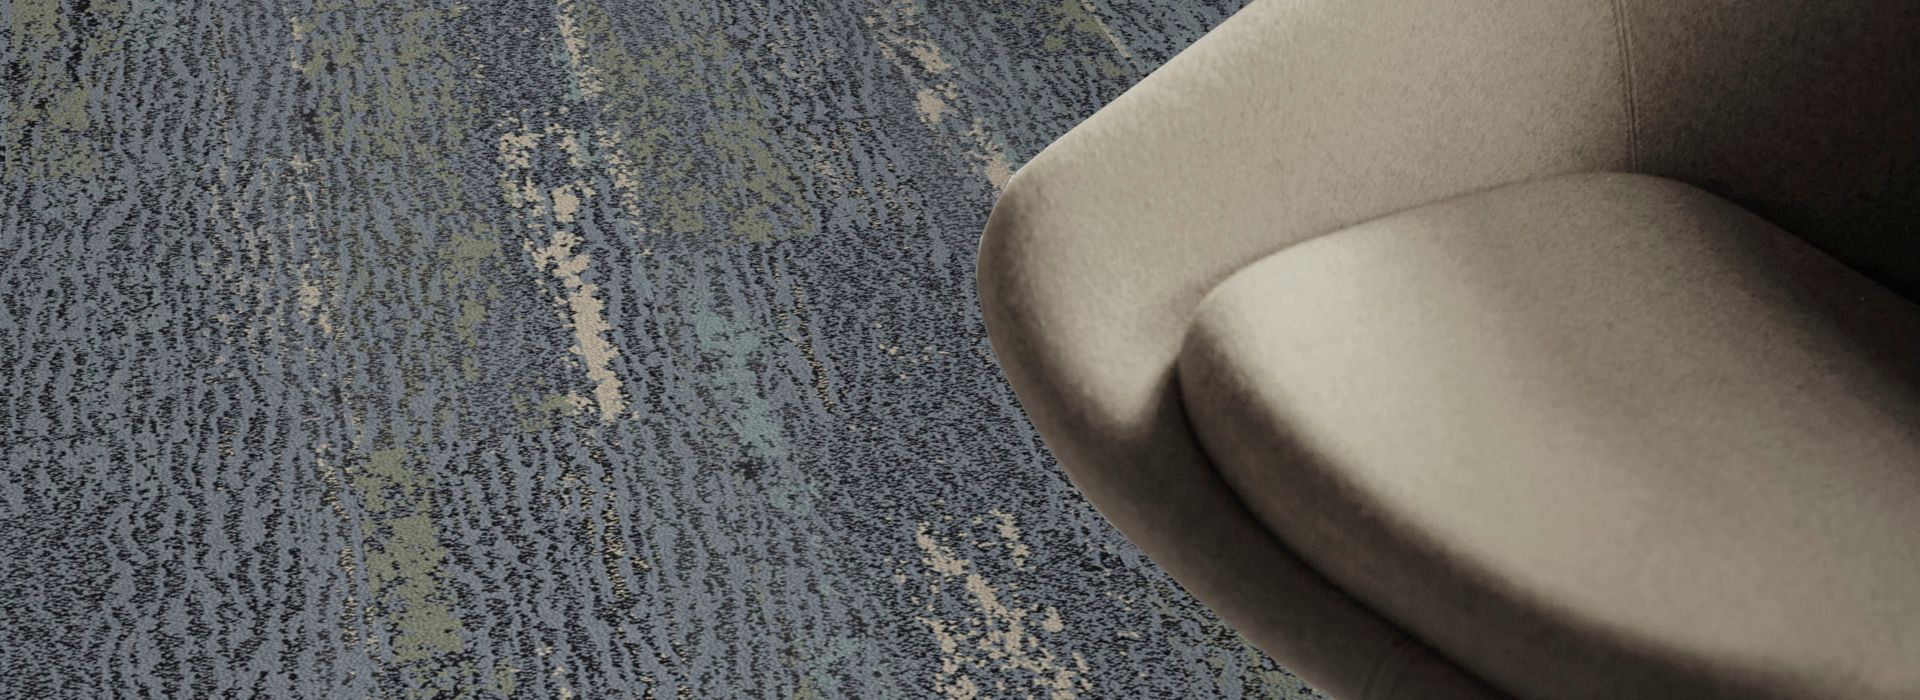 Detail of Interface Uprooted plank carpet tile with chair